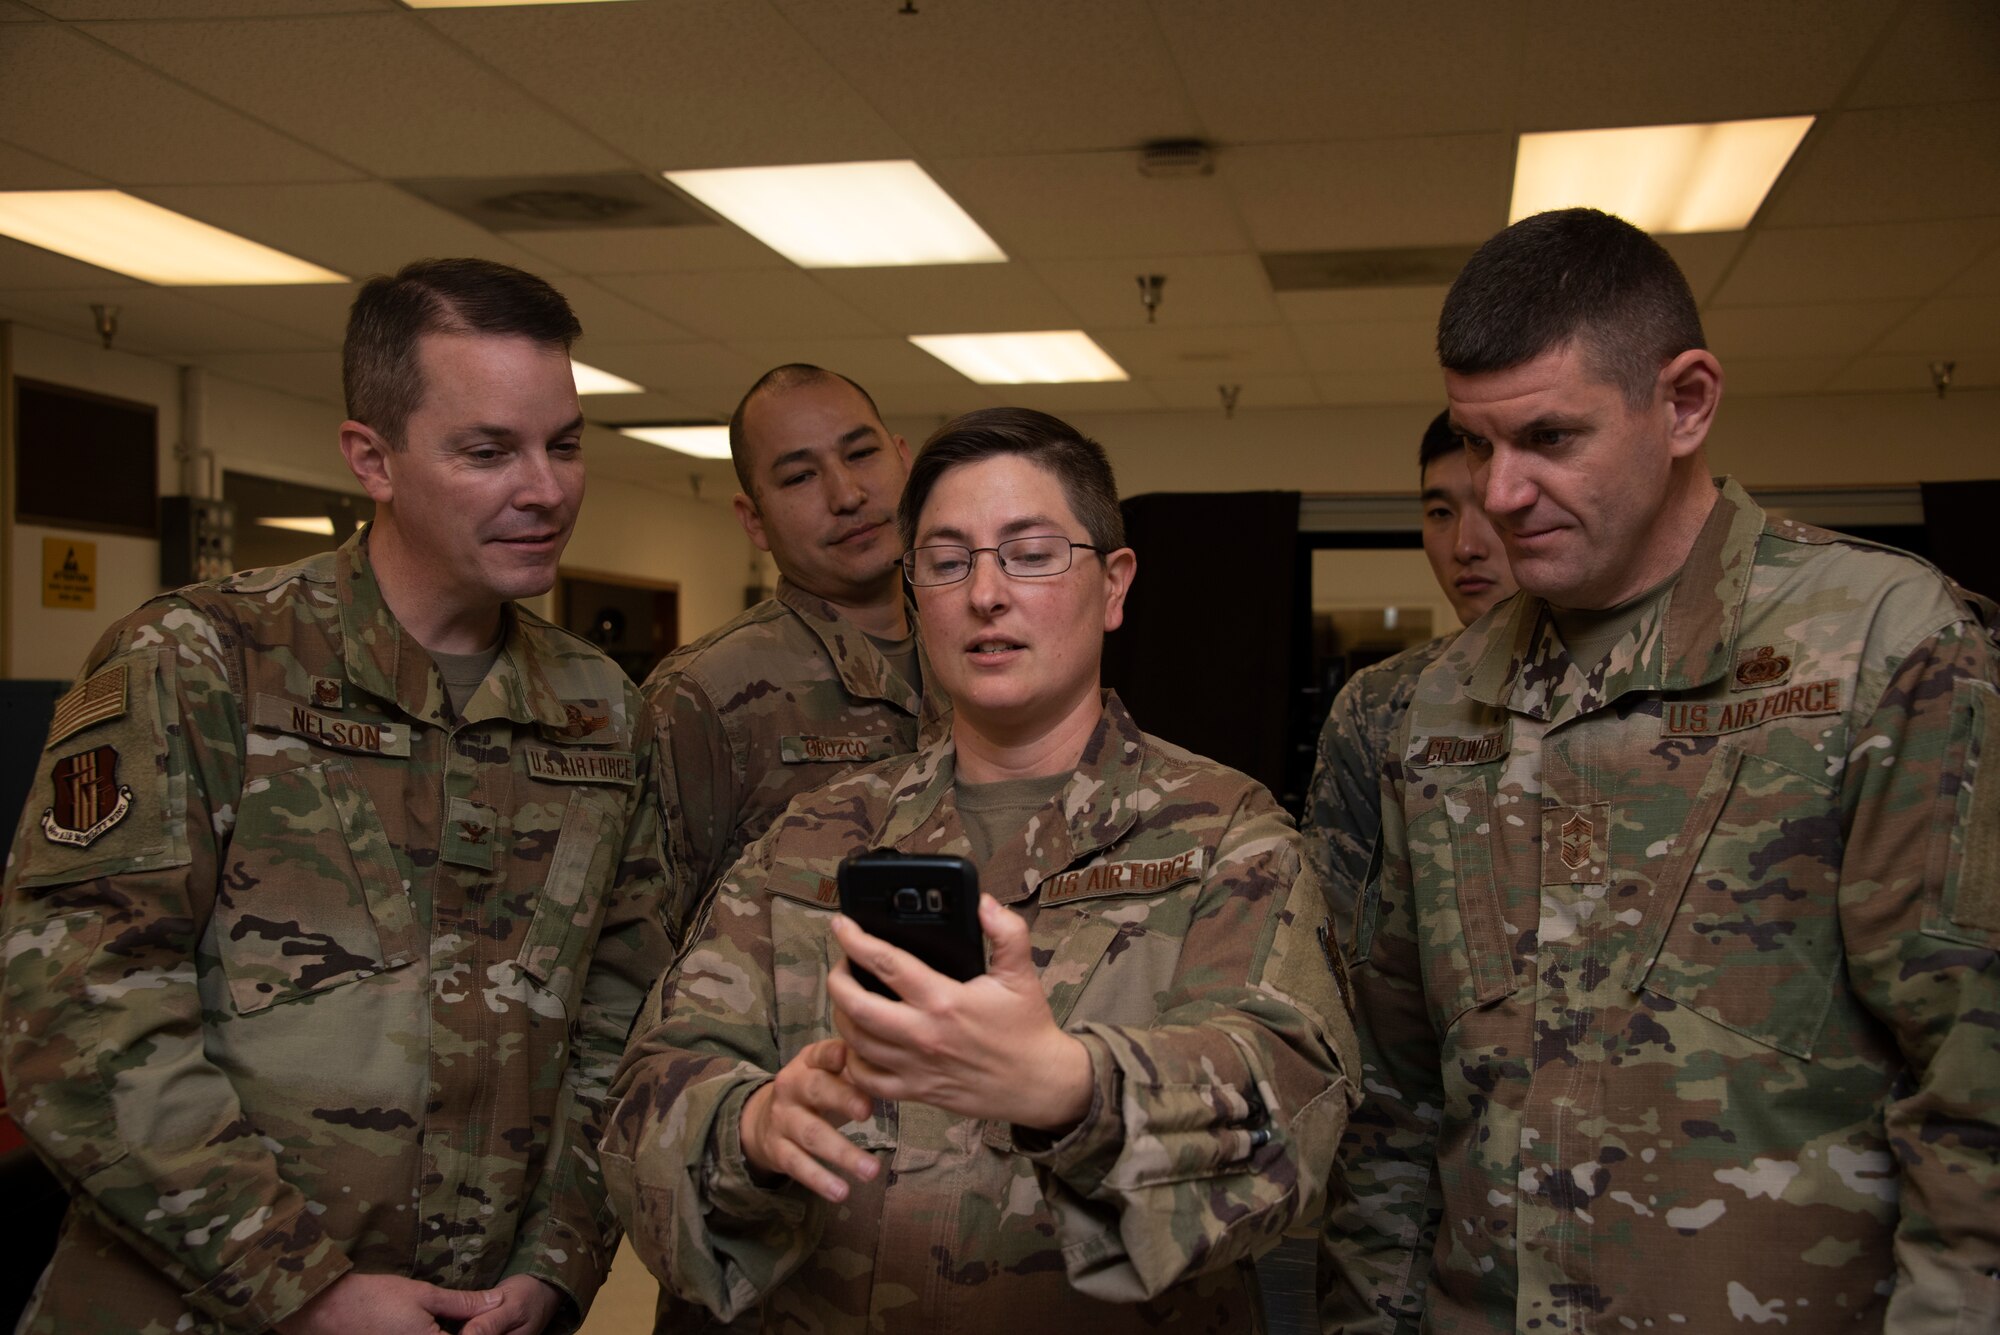 U.S. Air Force Tech. Sgt. Karen White, center right, 60th Maintenance Squadron avionics flight chief, center, shows Col. Jeff Nelson, left, 60th Air Mobility Wing commander, and Chief Master Sgt. Derek Crowder, right, 60th AMW command chief, images on her phone of C-17 Globemaster III maintenance equipment Nov. 1, 2019, during a Leadership Rounds visit at Travis Air Force Base, California. The Leadership Rounds program provides 60th AMW leadership an opportunity to interact with Airmen to get a detailed view of each mission performed at Travis AFB. (U.S. Air Force photo by Tech. Sgt. James Hodgman)